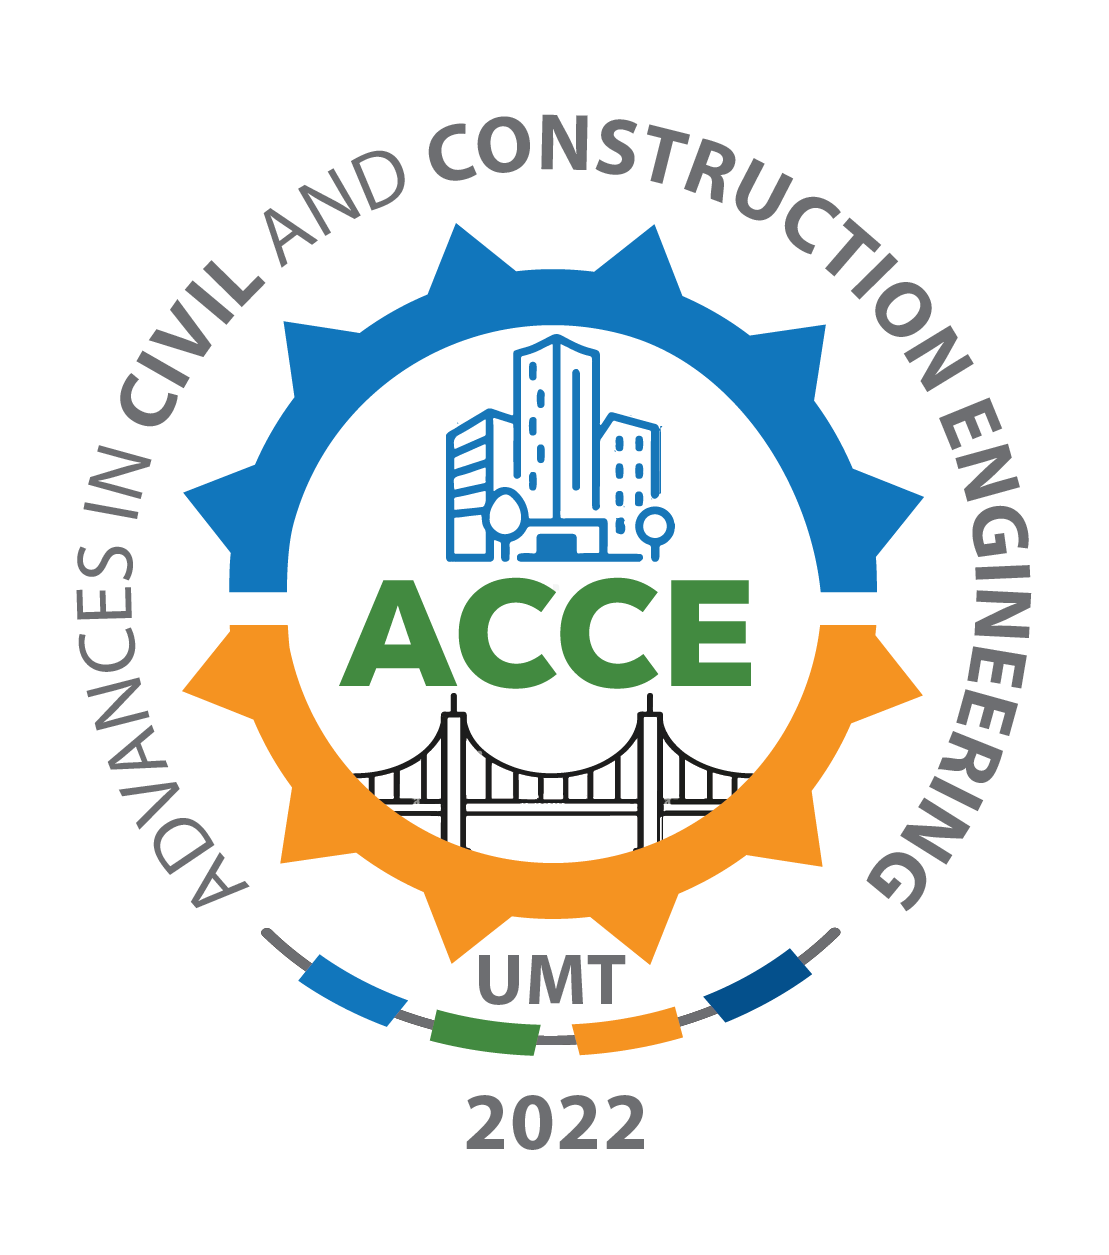 "Advances in Civil and Construction Engineering (ACCE)"